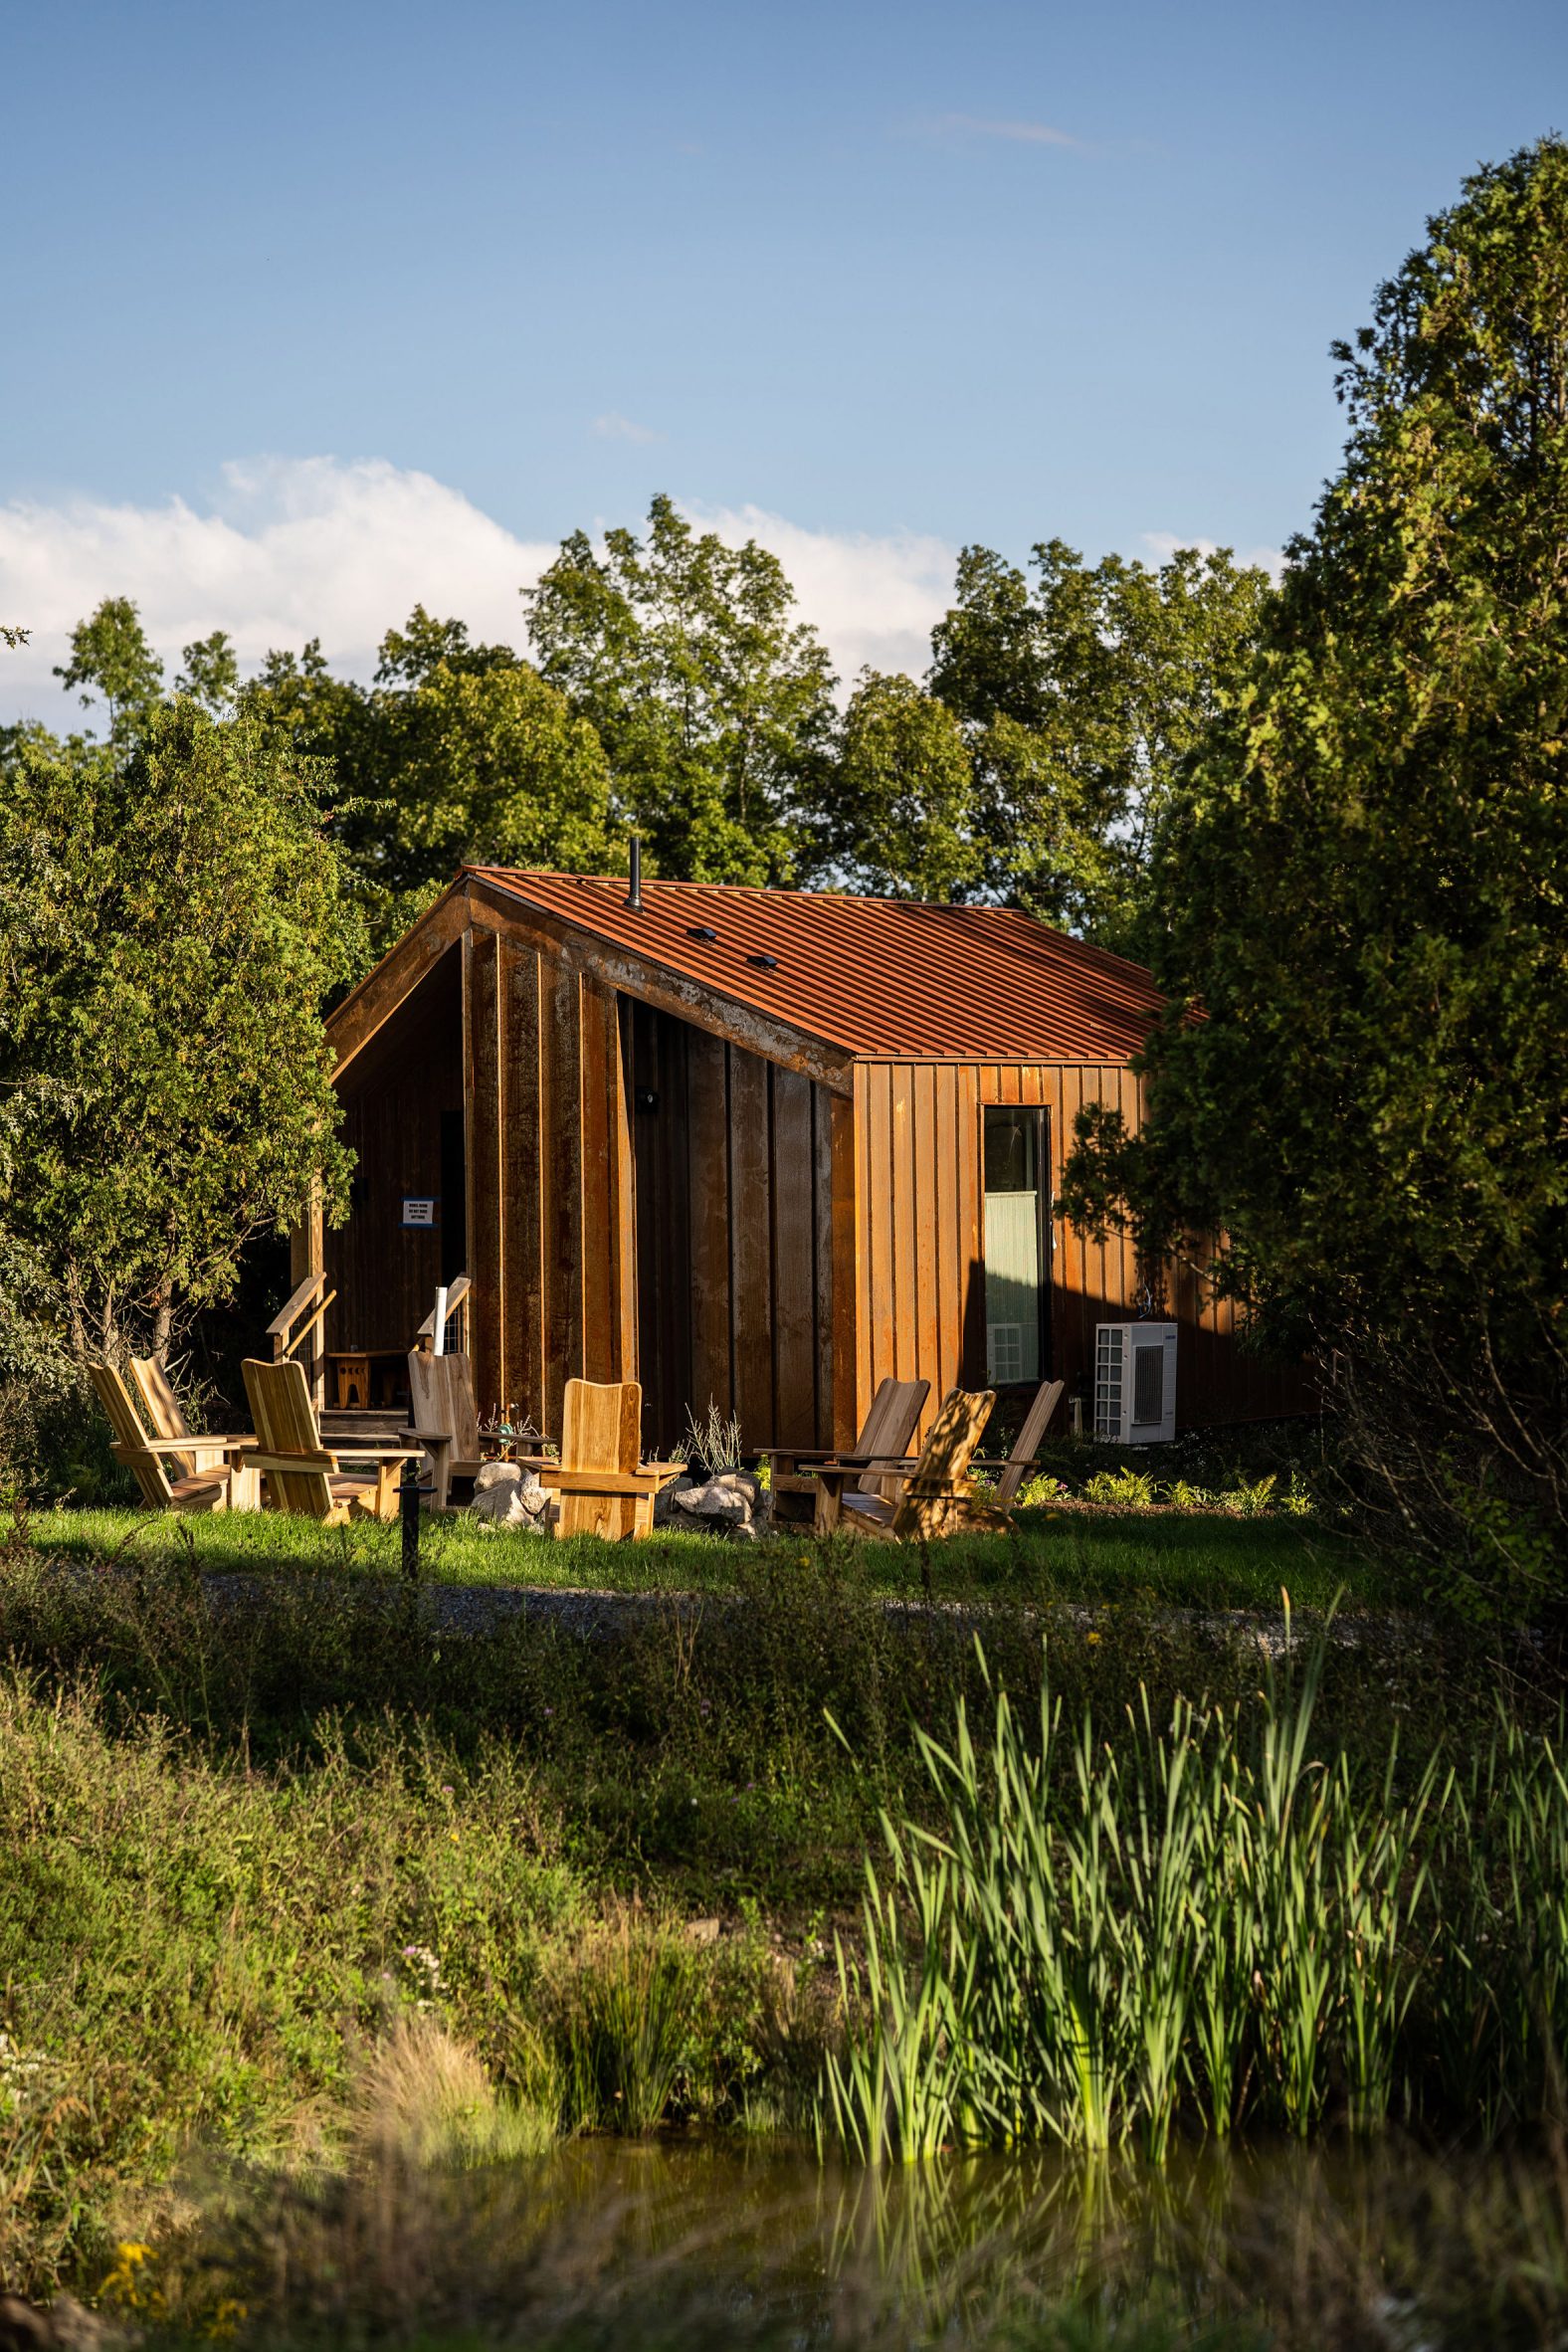 Cabin clad in Corten steel surrounded by trees